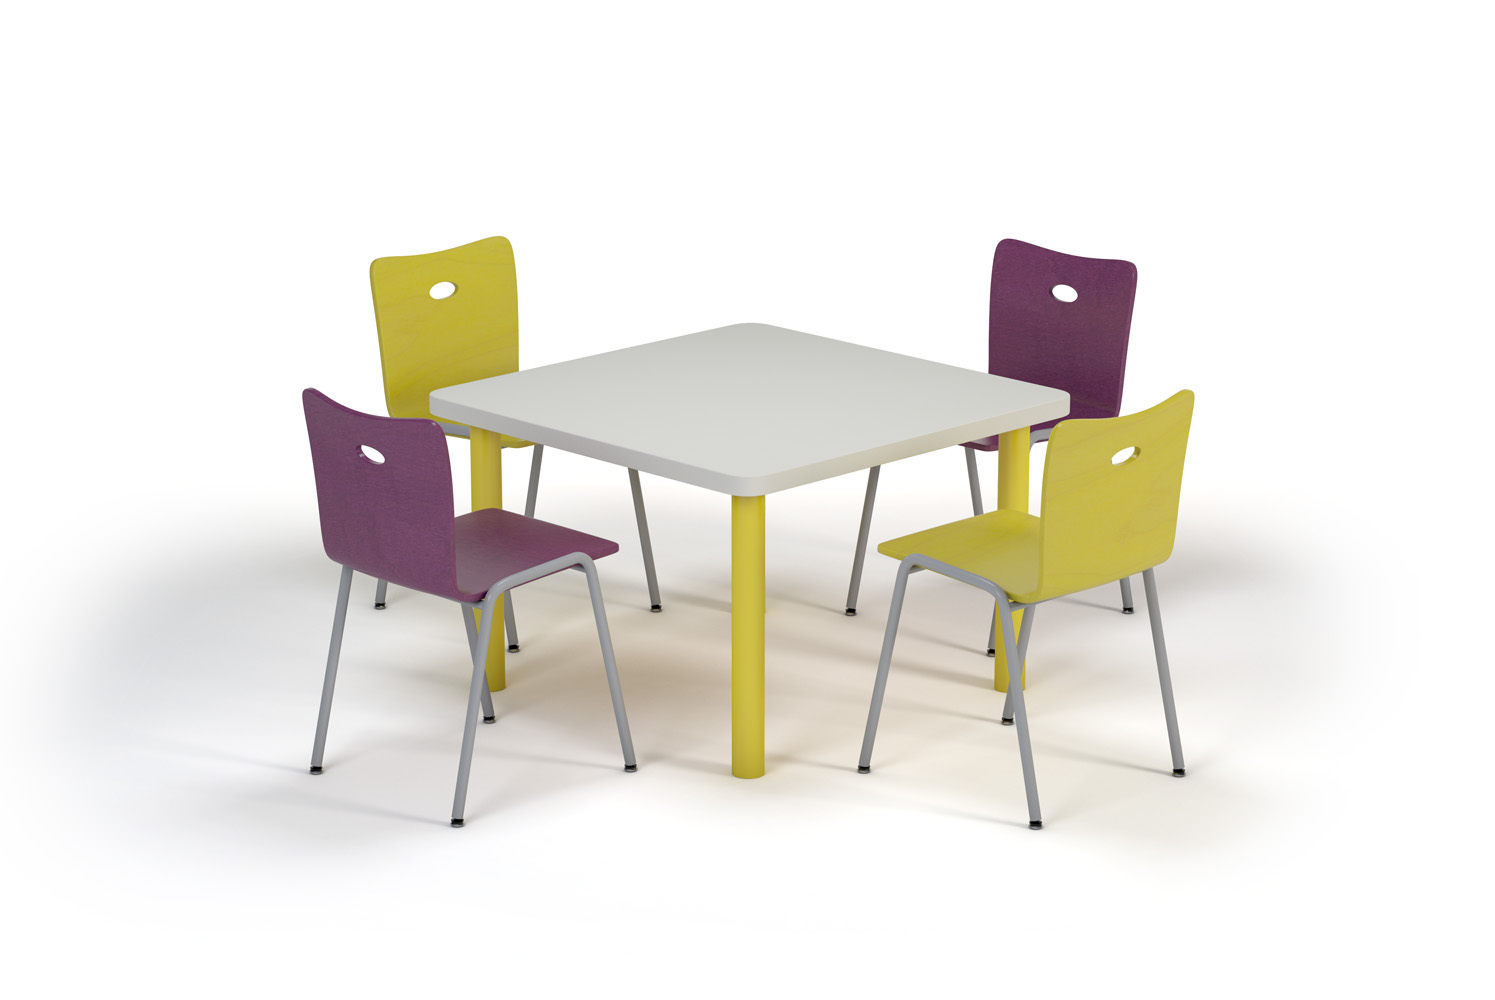 Benton Jr chairs with Post jr table